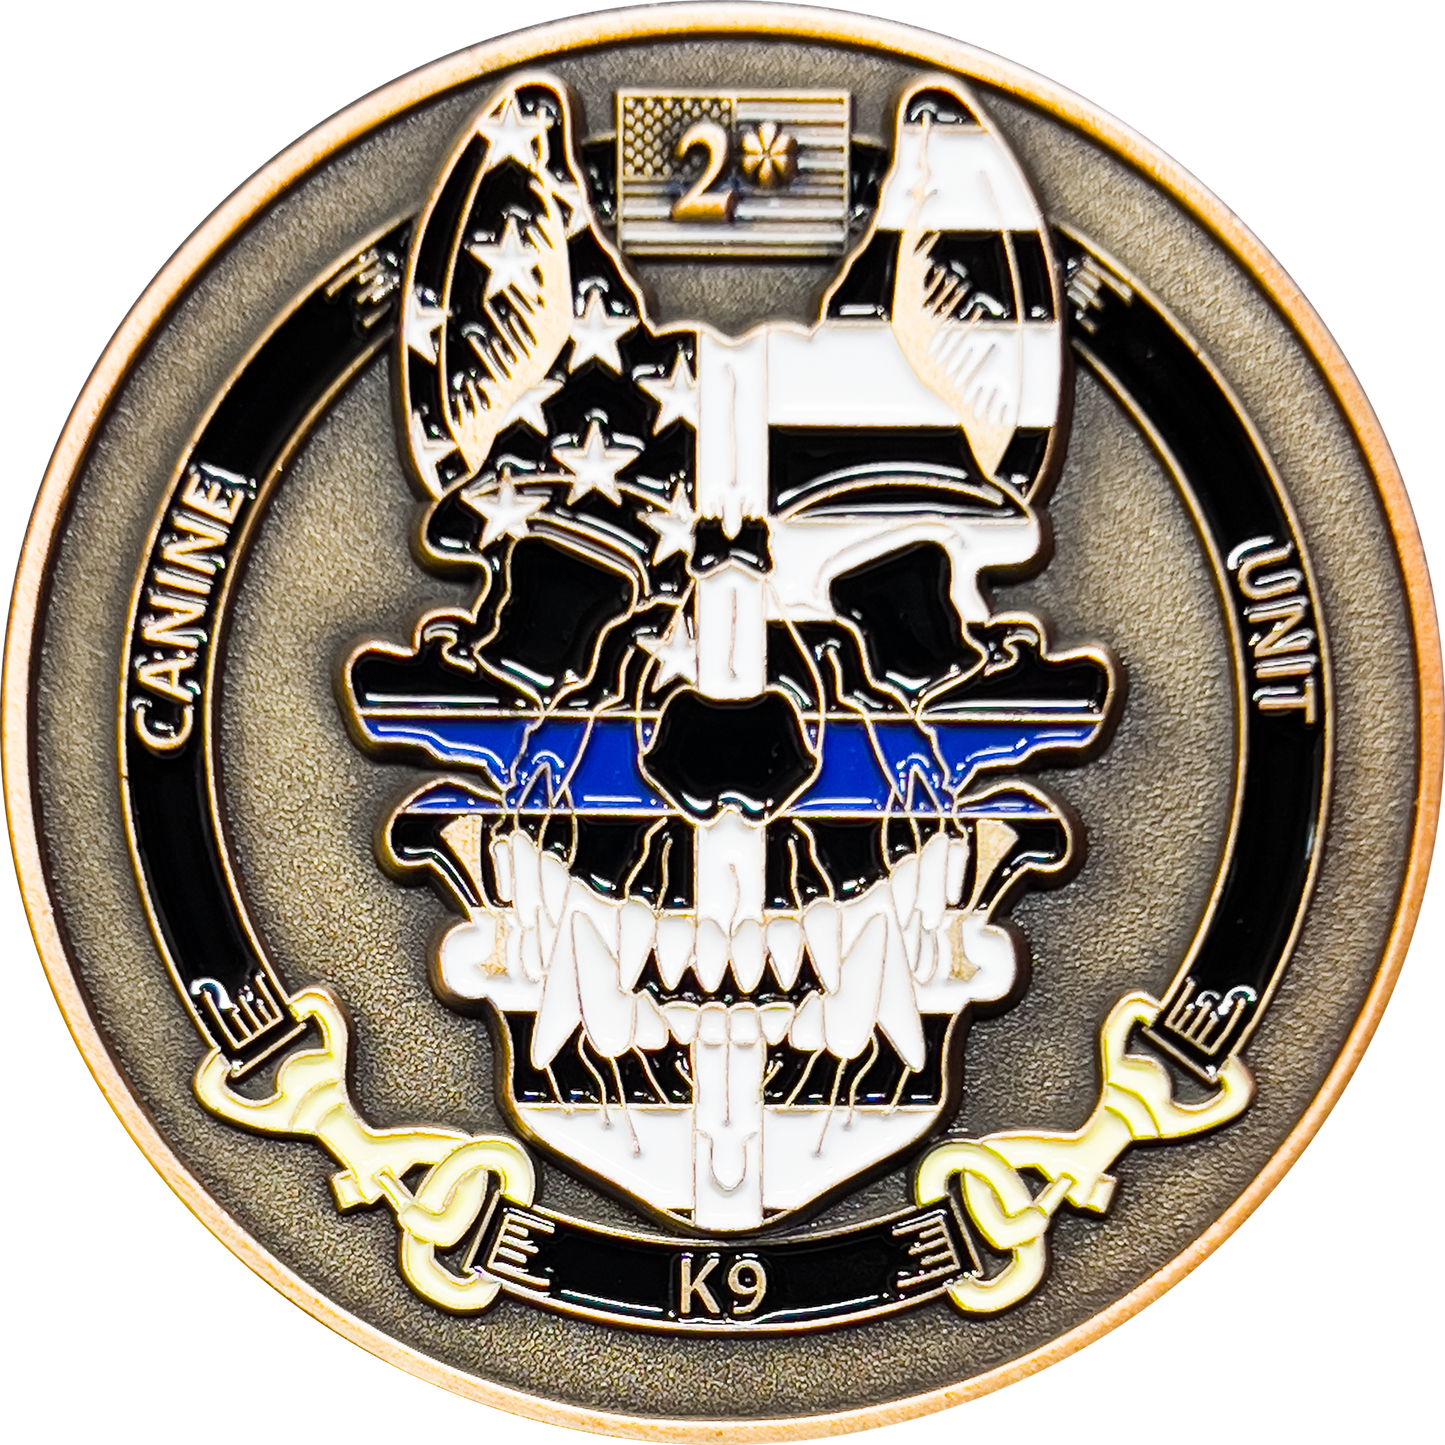 GL11-004 CBP Officer Canine Enforcement K9 Thin Blue Line Challenge Coin Field Operations OFO